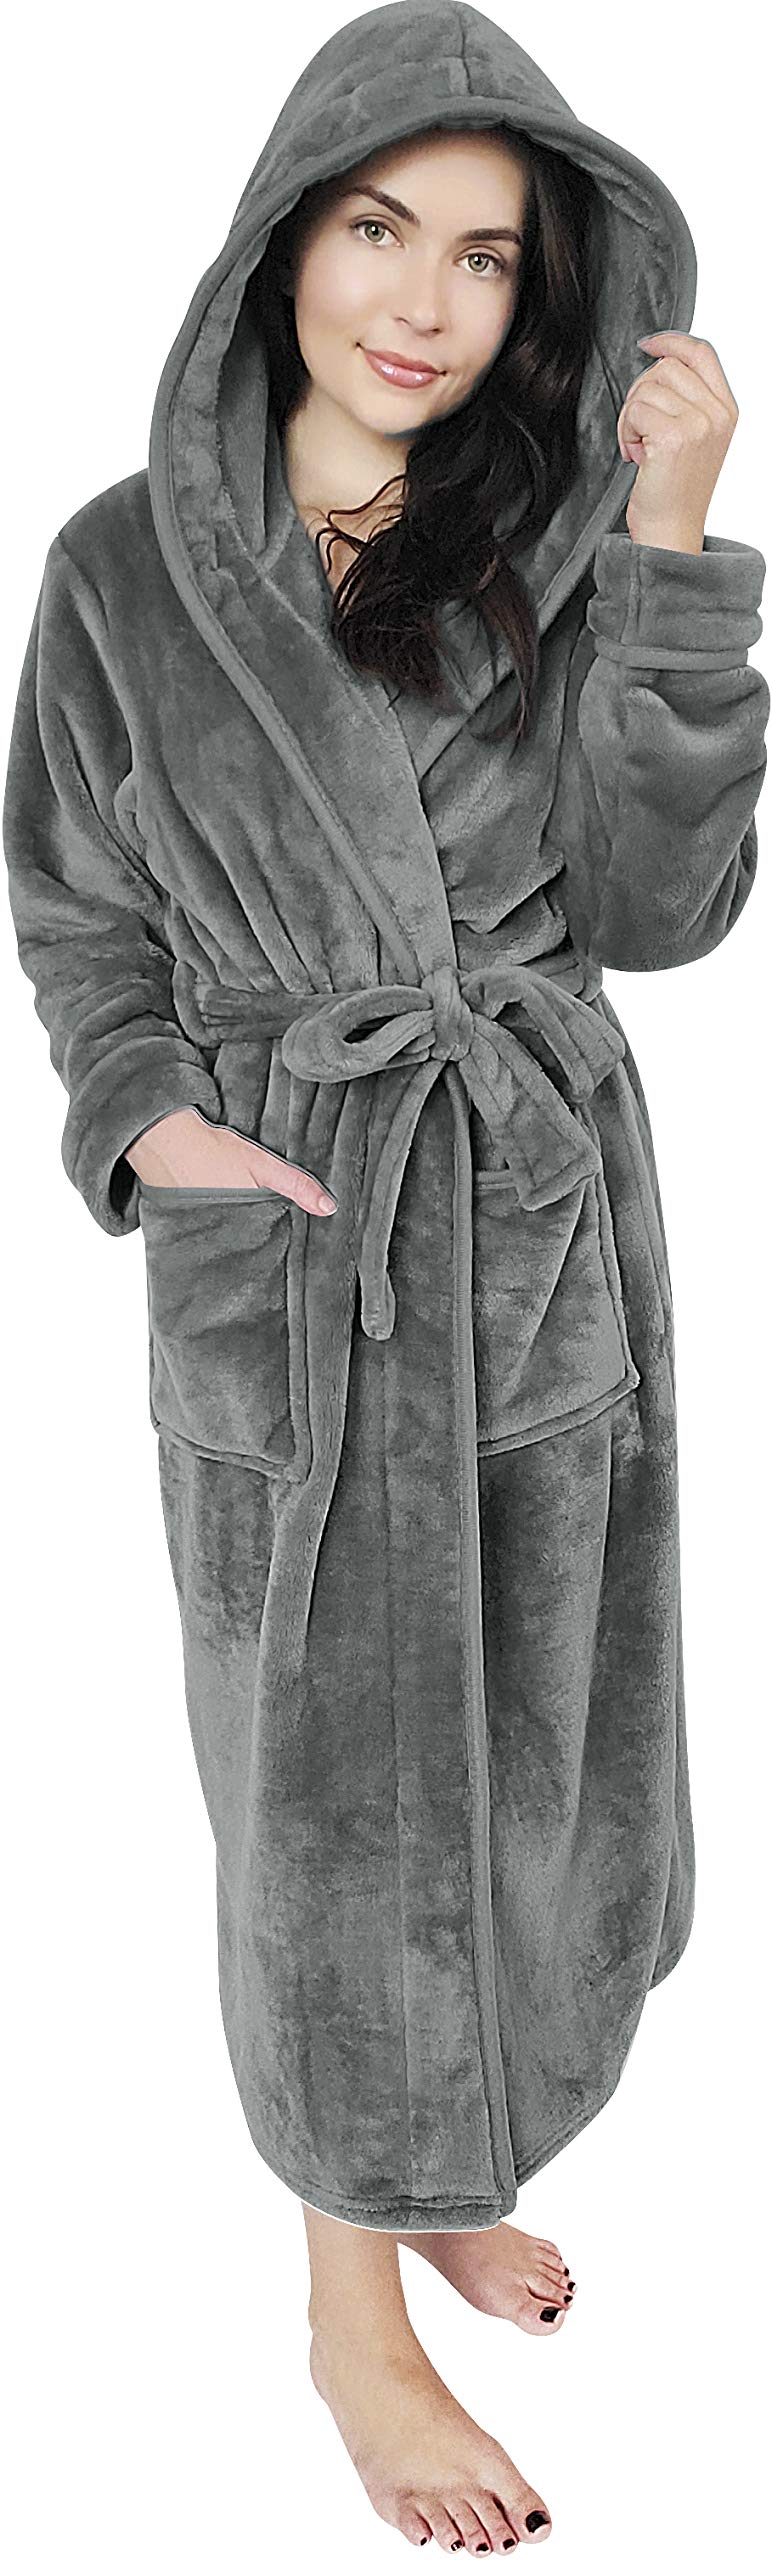 womens hooded bathrobe - OFF-54% >Free Delivery